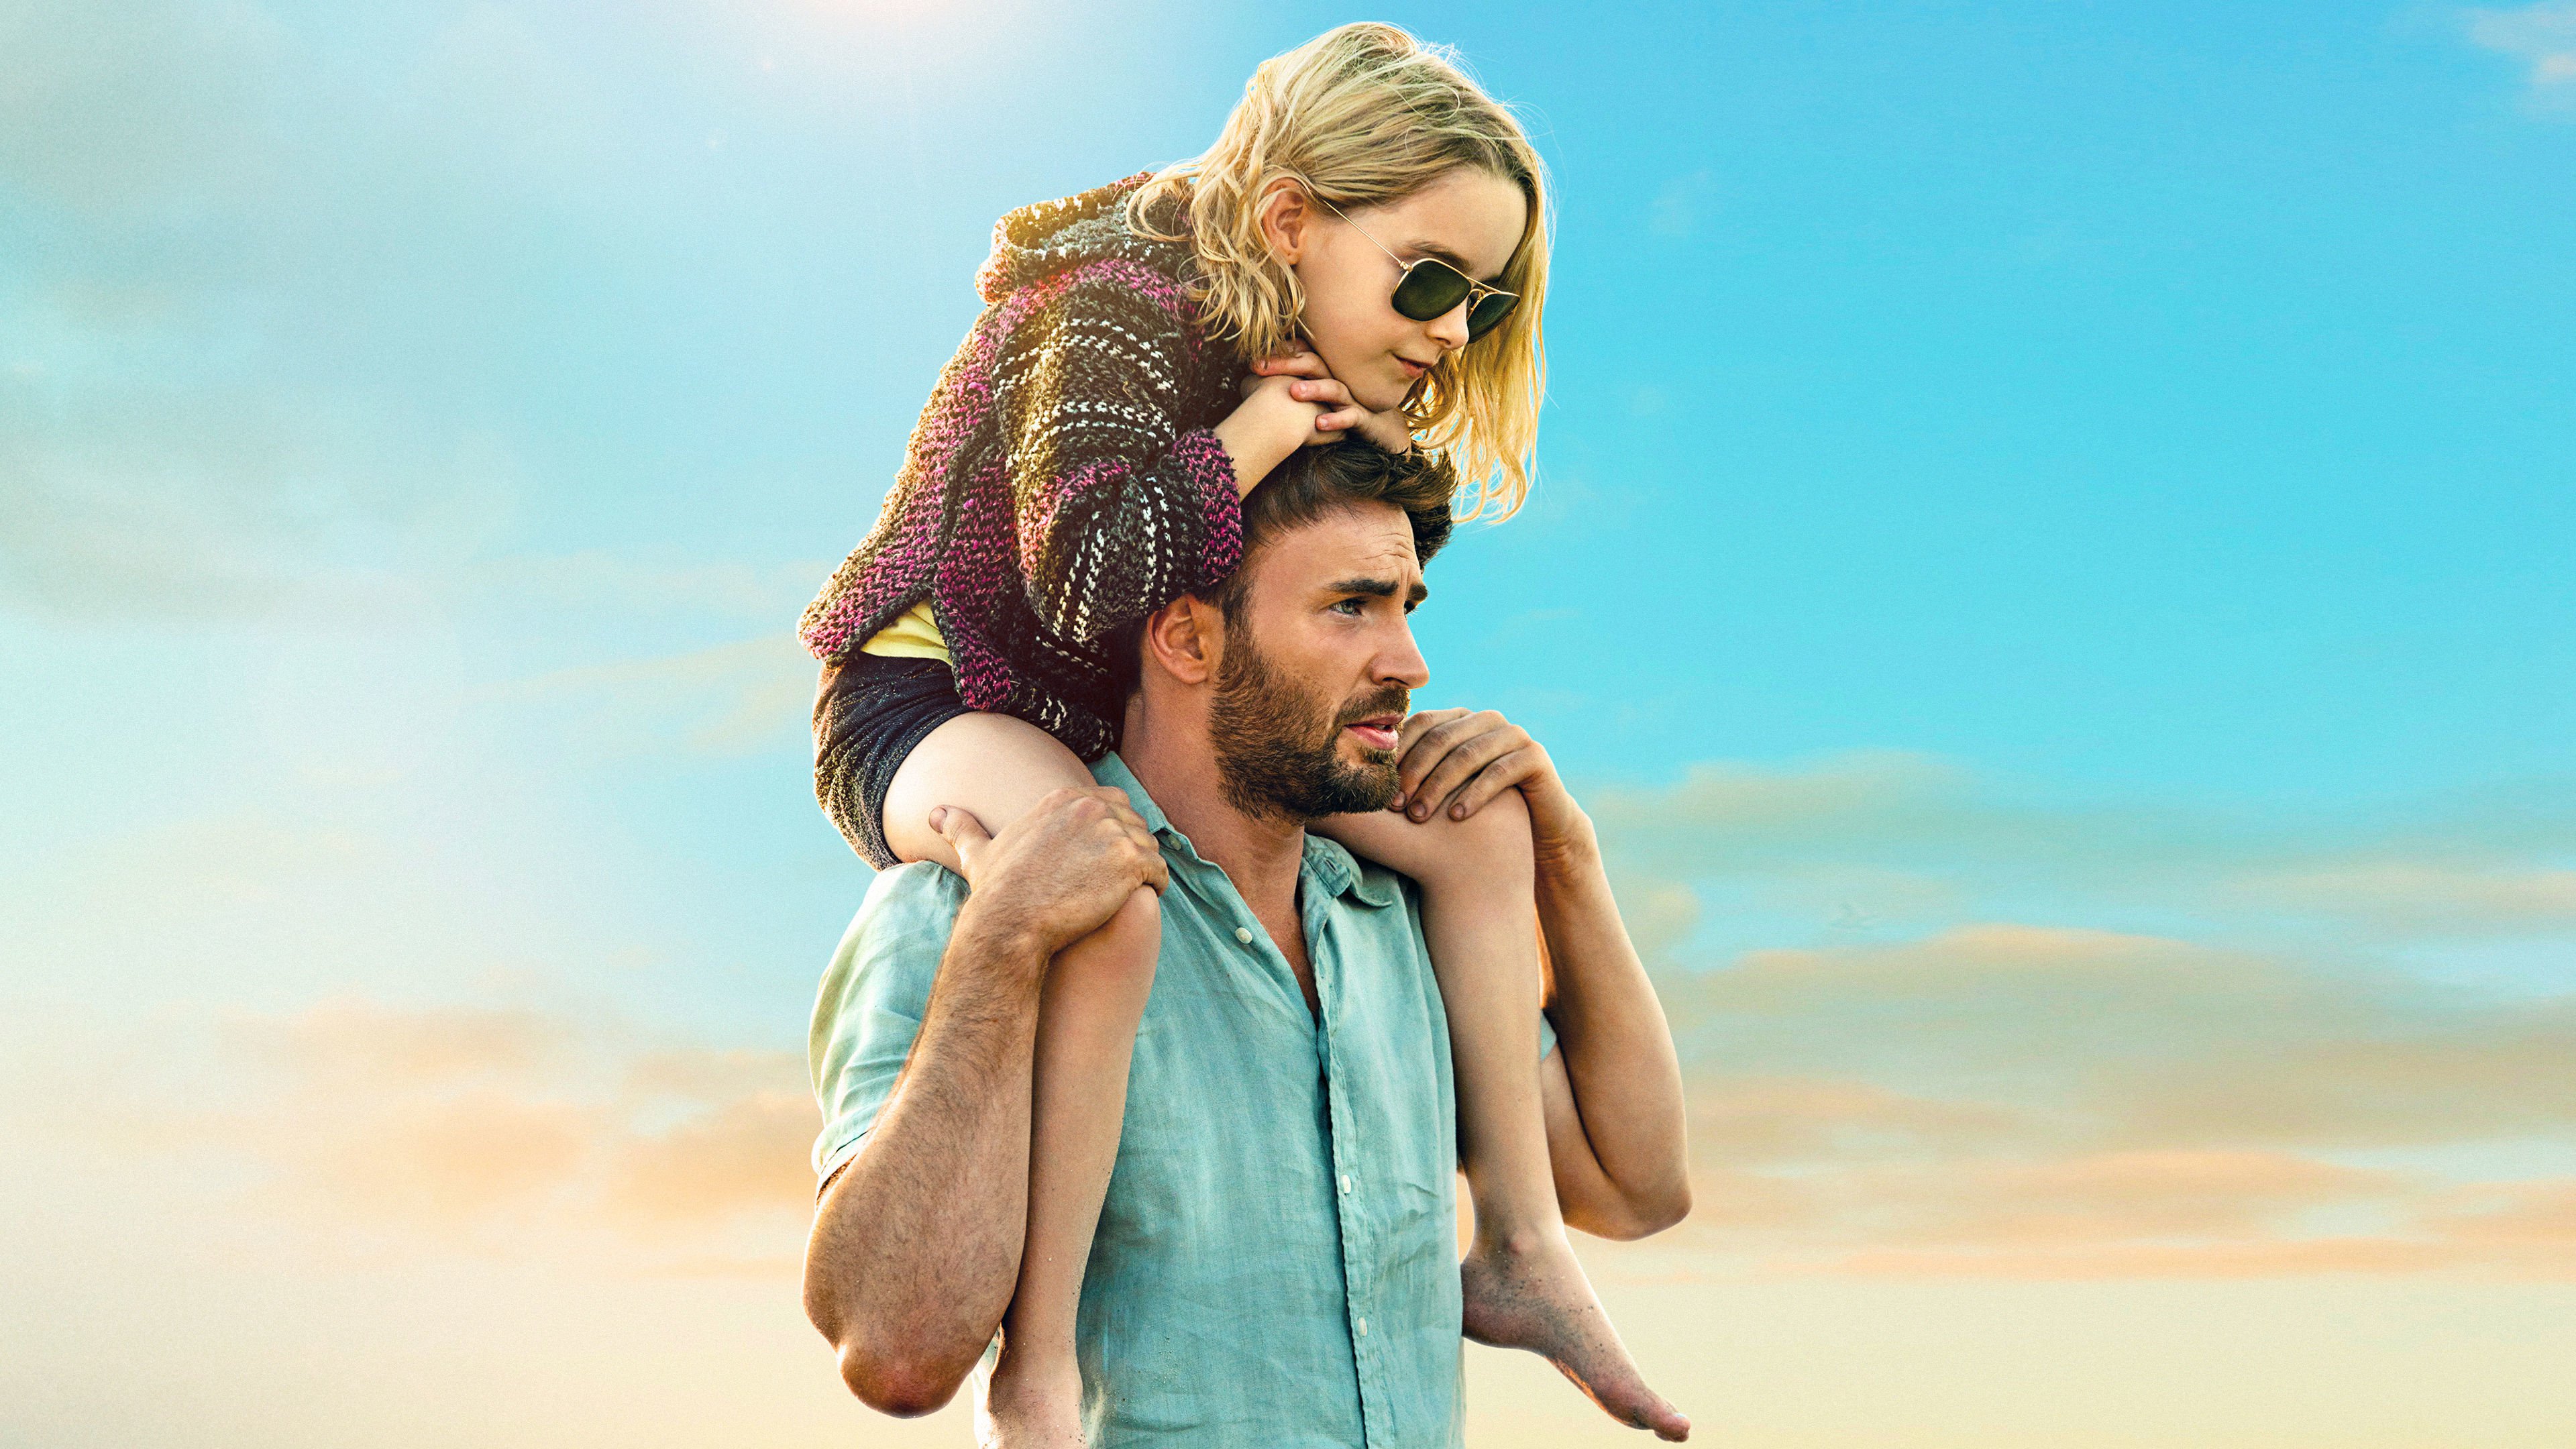 gifted full movie with english subtitles watch online